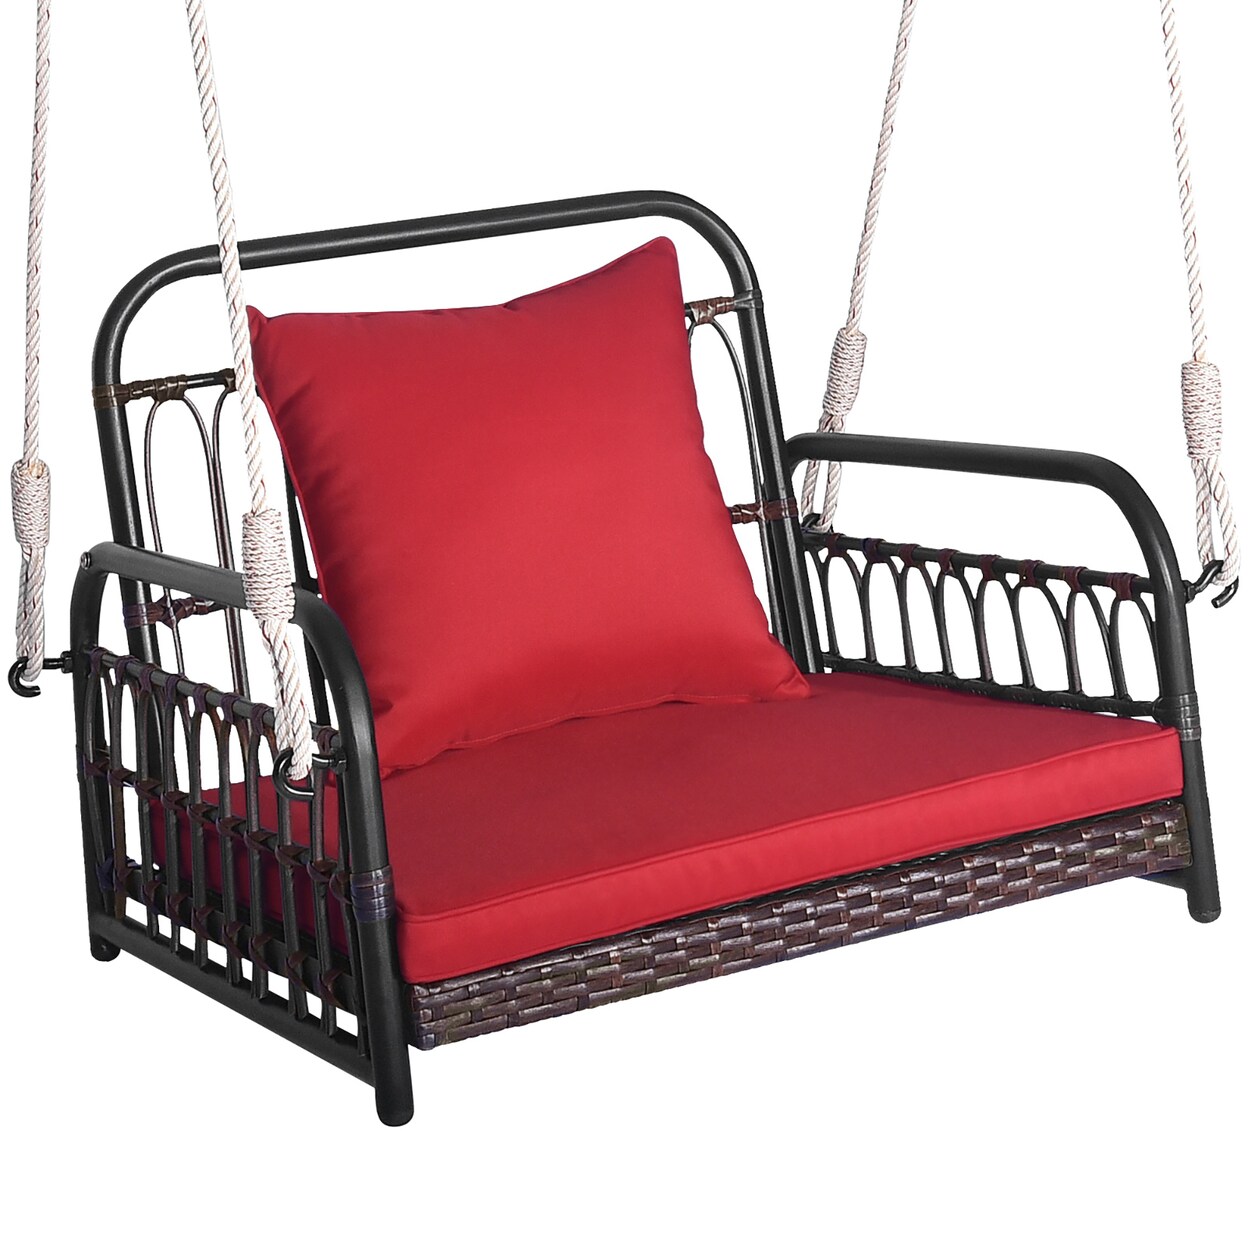 Gymax Single Person Hanging Swing Outdoor Hanging Seat w/ Back Cushion and Seat Cushion